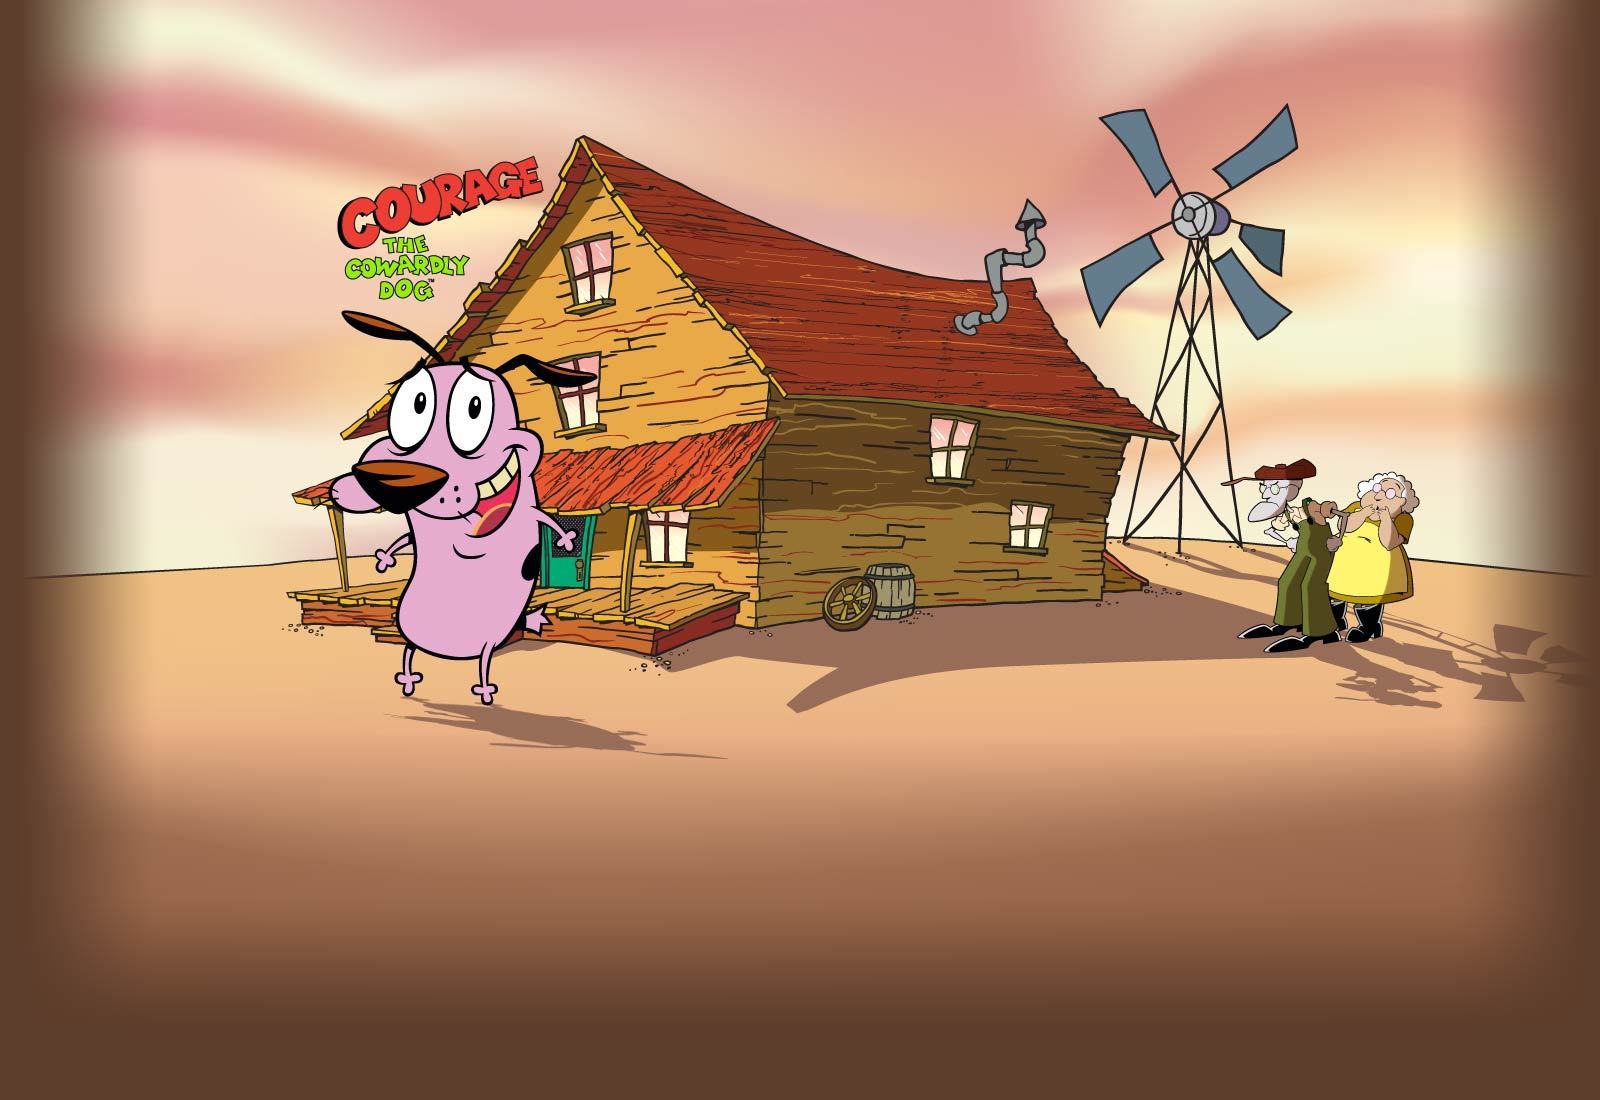 Courage-the-Cowardly-Dog-courage-the-cowardly-dog-21182043-1600-1100.jpg